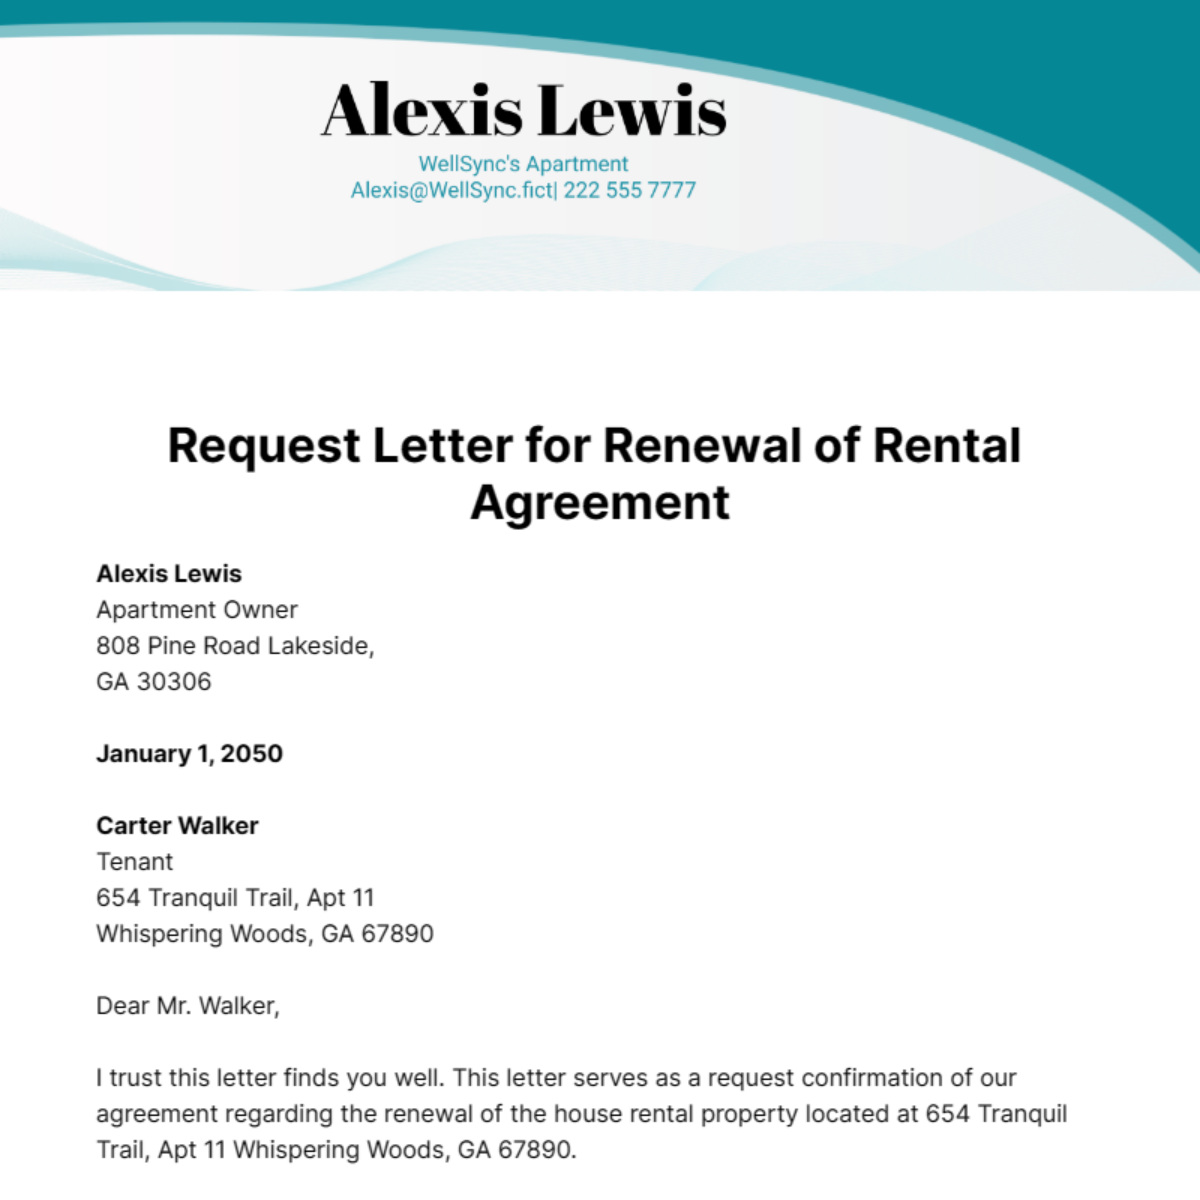 Request Letter for Renewal of Rental Agreement Template